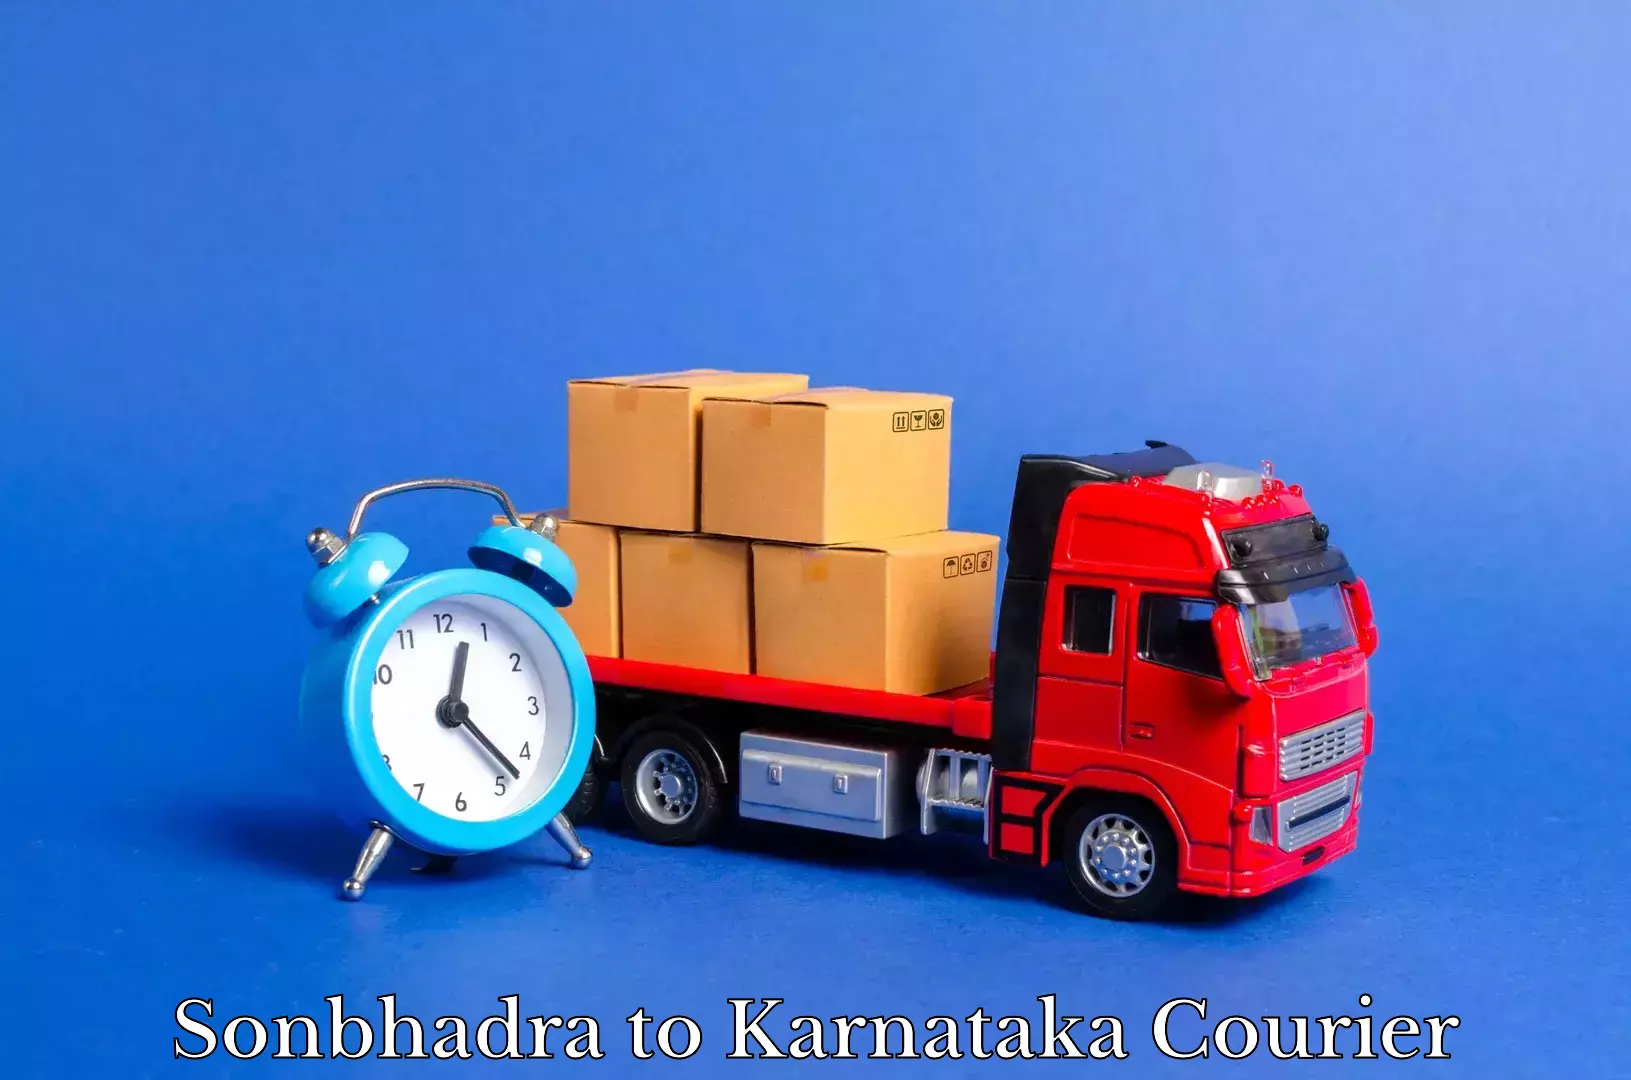 Quality relocation assistance Sonbhadra to Belthangady